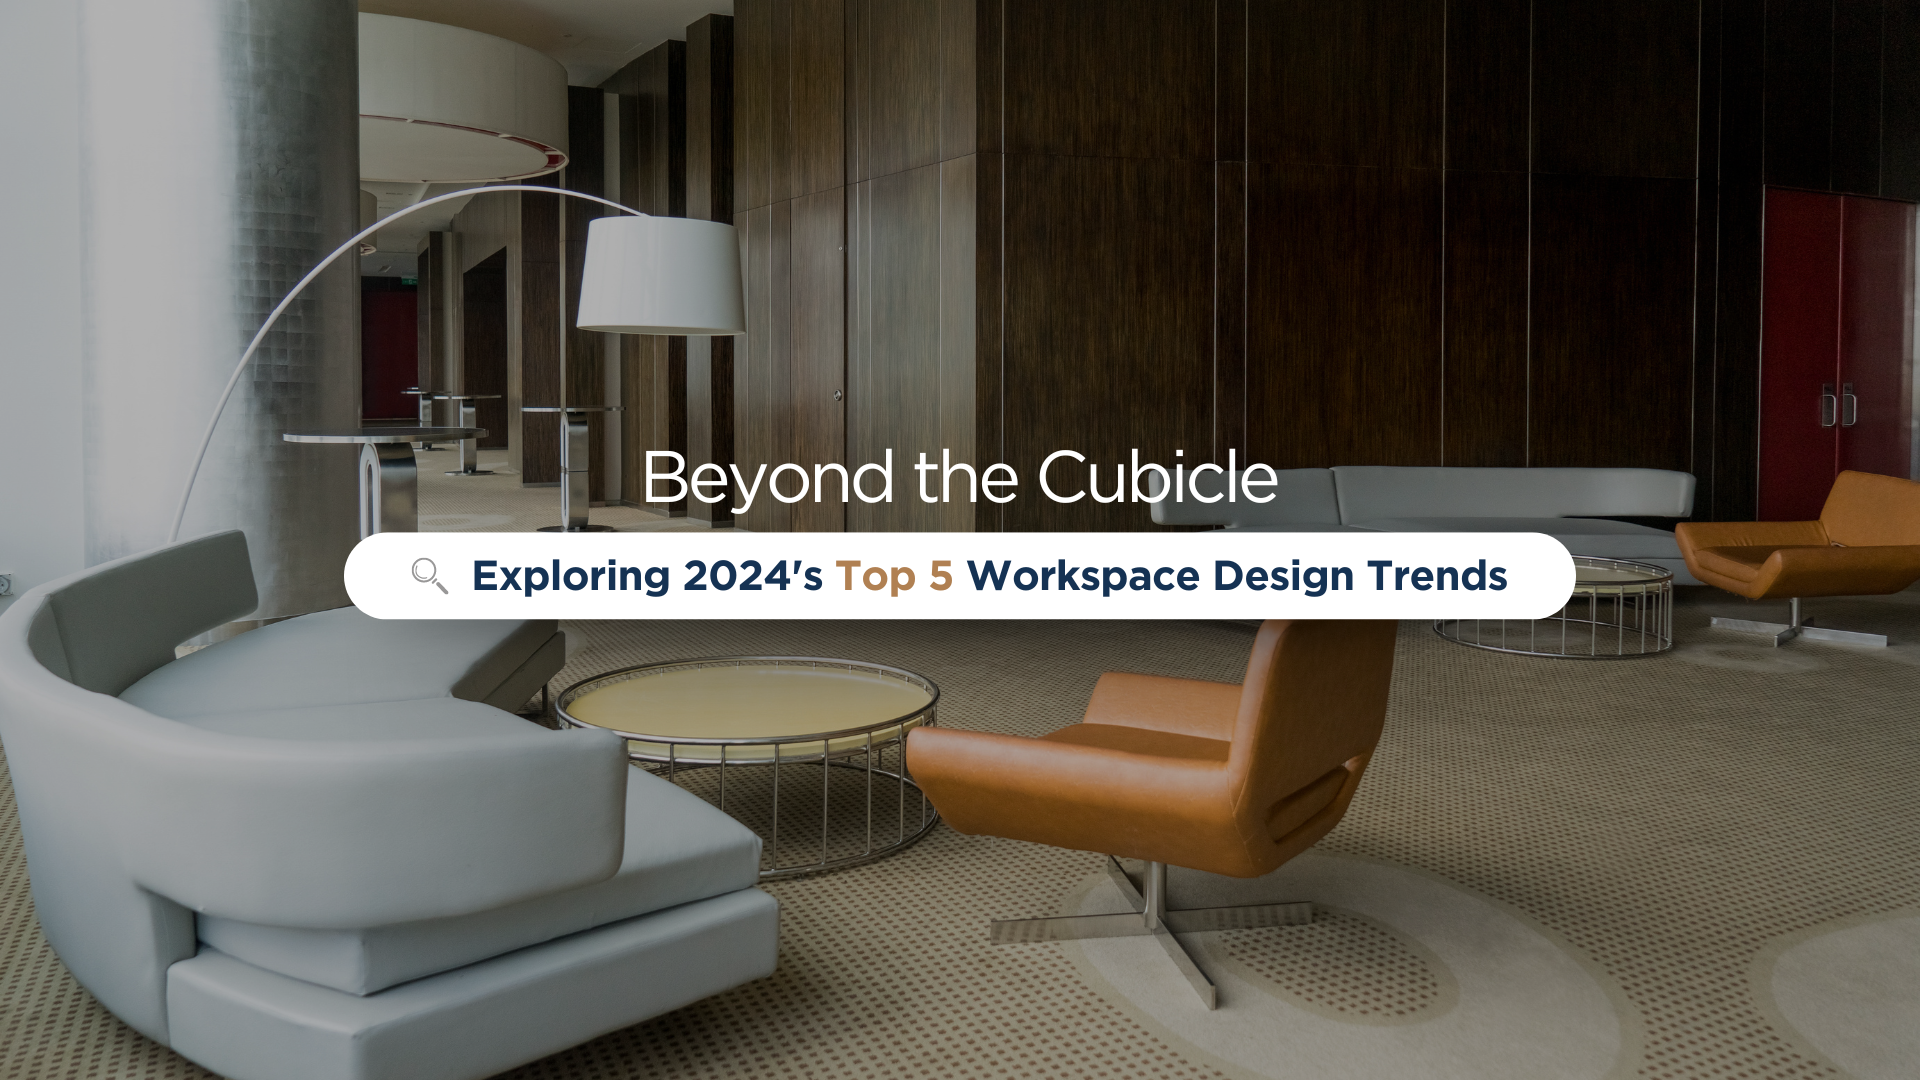 Beyond the Cubicle: Exploring 2024's Top 5 Workspace Design Trends